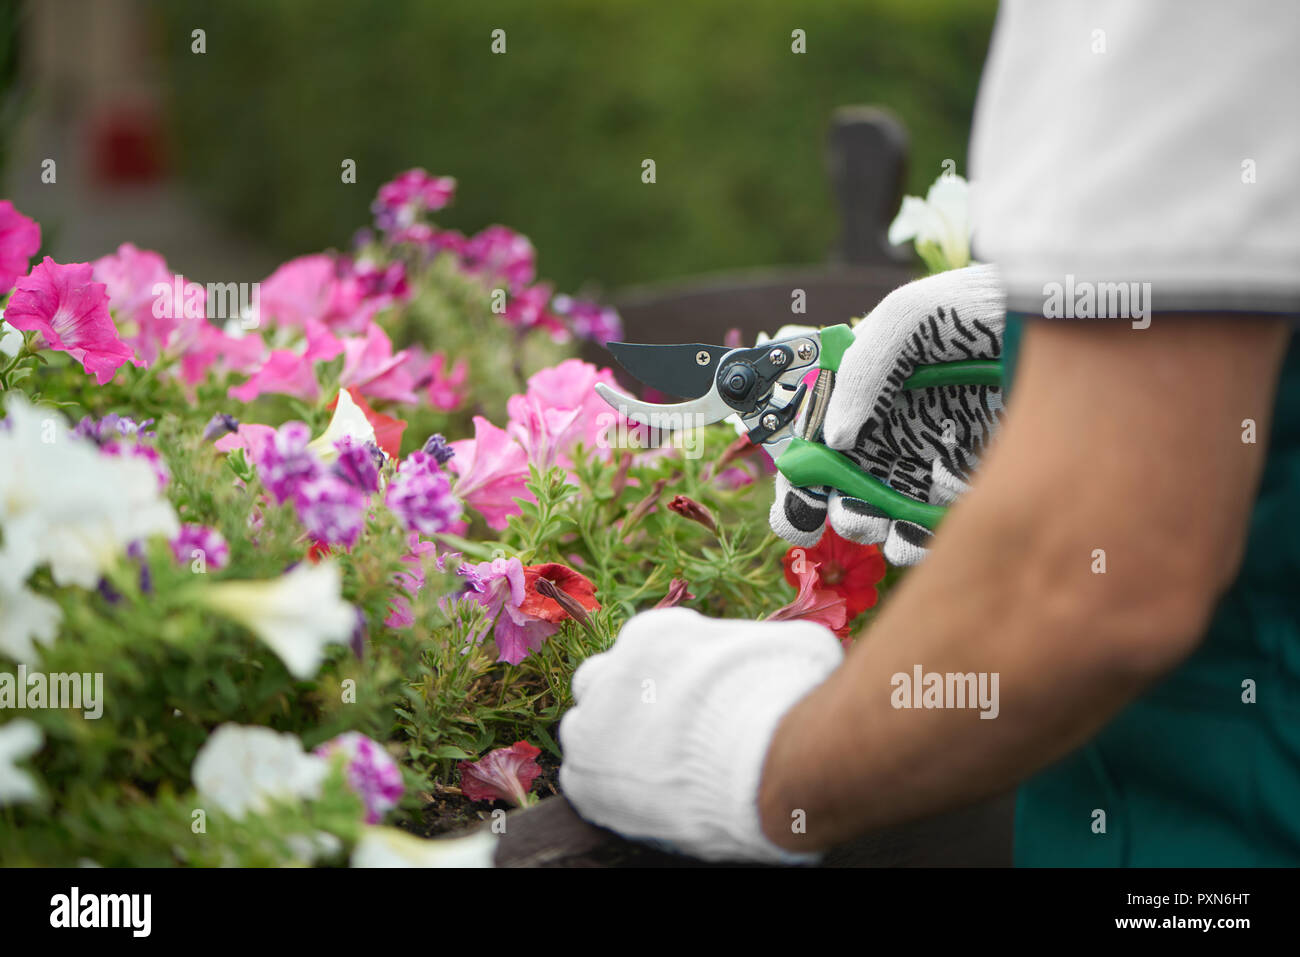 Rare view of male worker hand cutting flower in drawer in garden. Muscular man wearing in special overalls with protective gloves, working with secateurs in garden with plants. Seasonal work concept. Stock Photo